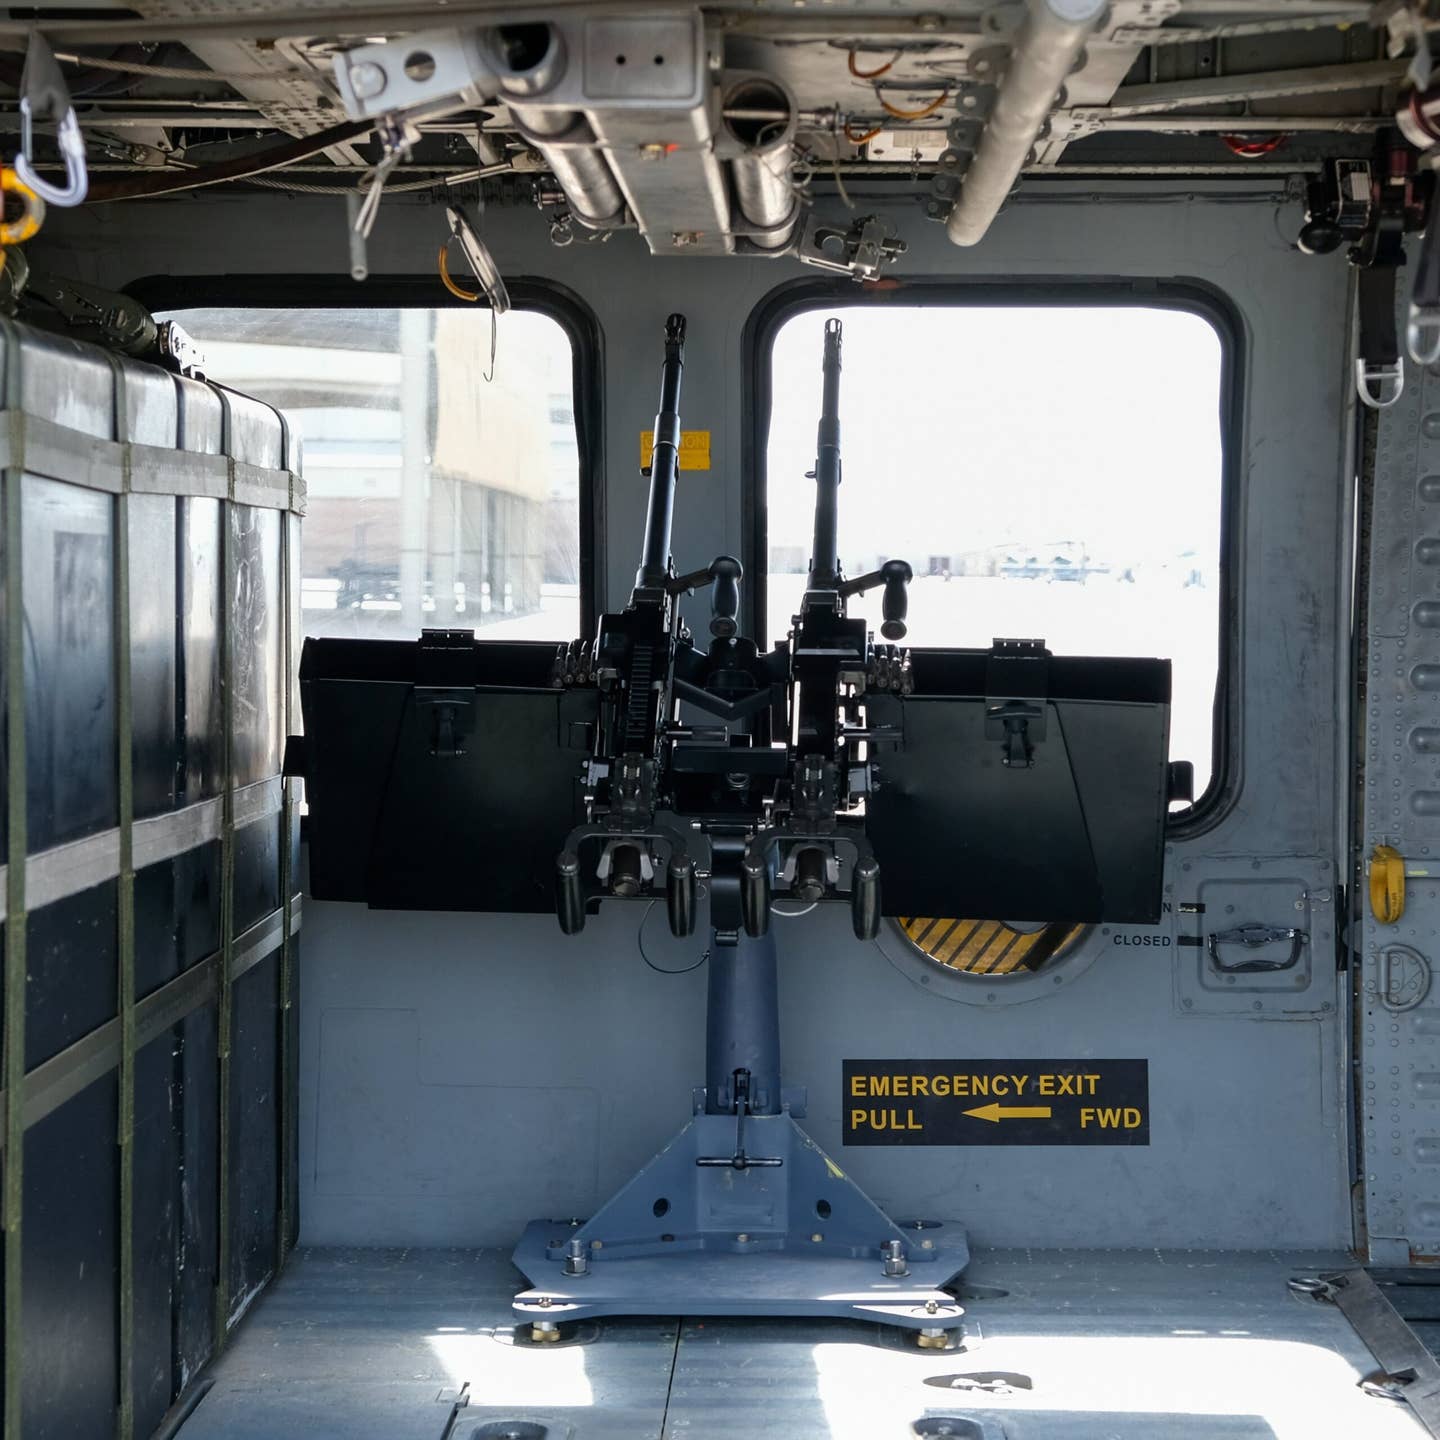 How the gun mount appears in the HH-60G's doorway with the doors closed. The floor bracket, base, and mount pulled from military stocks can be seen. <em>Credit: U.S. Air Force photo by Andre Trinidad</em>